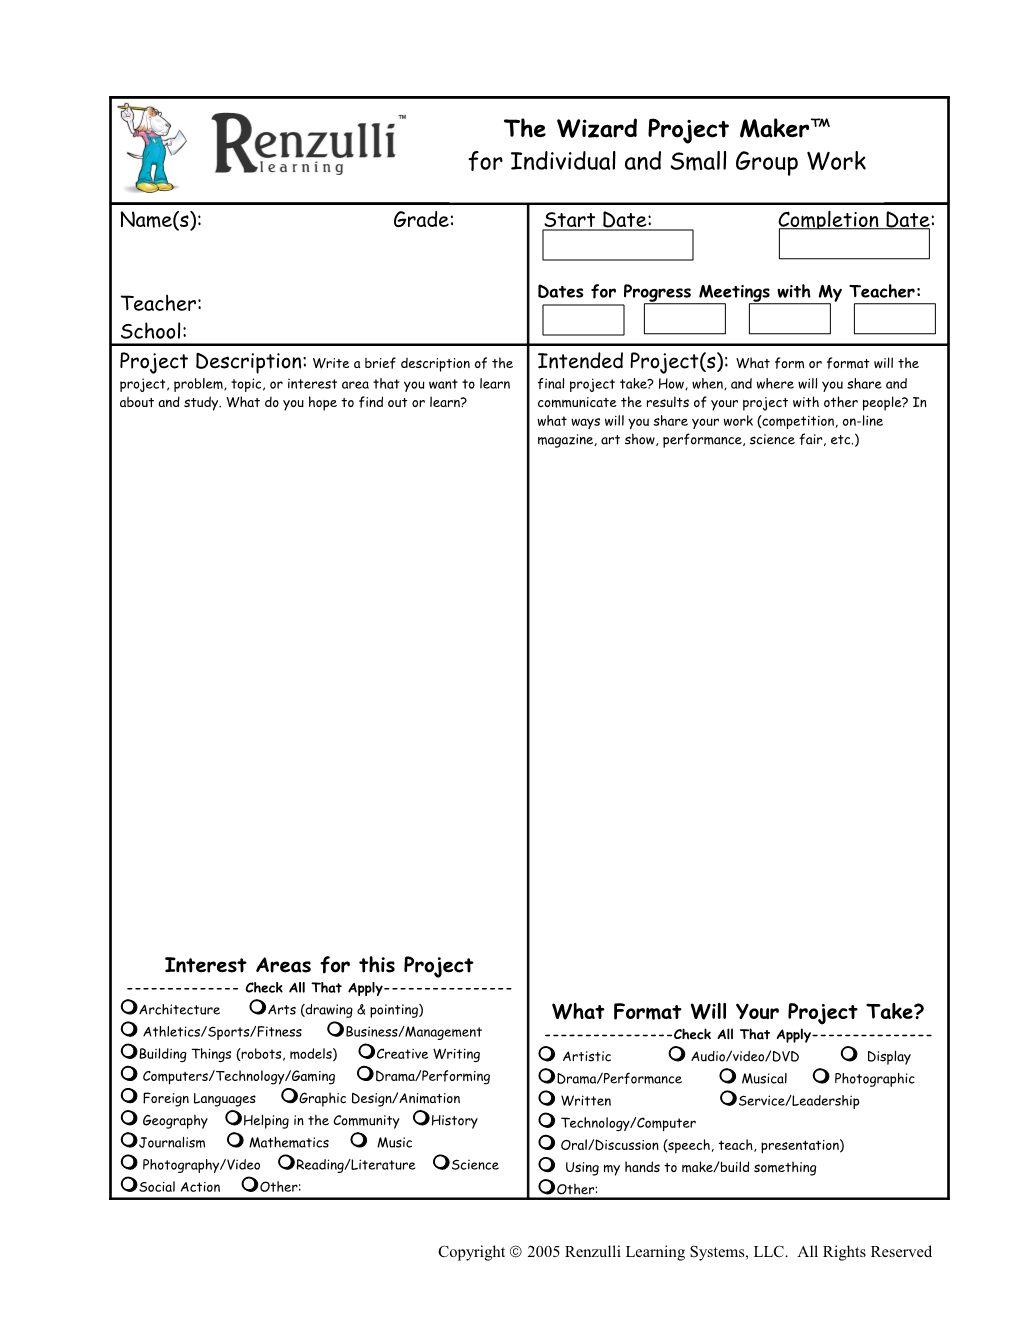 Renzulli Learning Project-A-Lyzer for Individual and Small Group Work